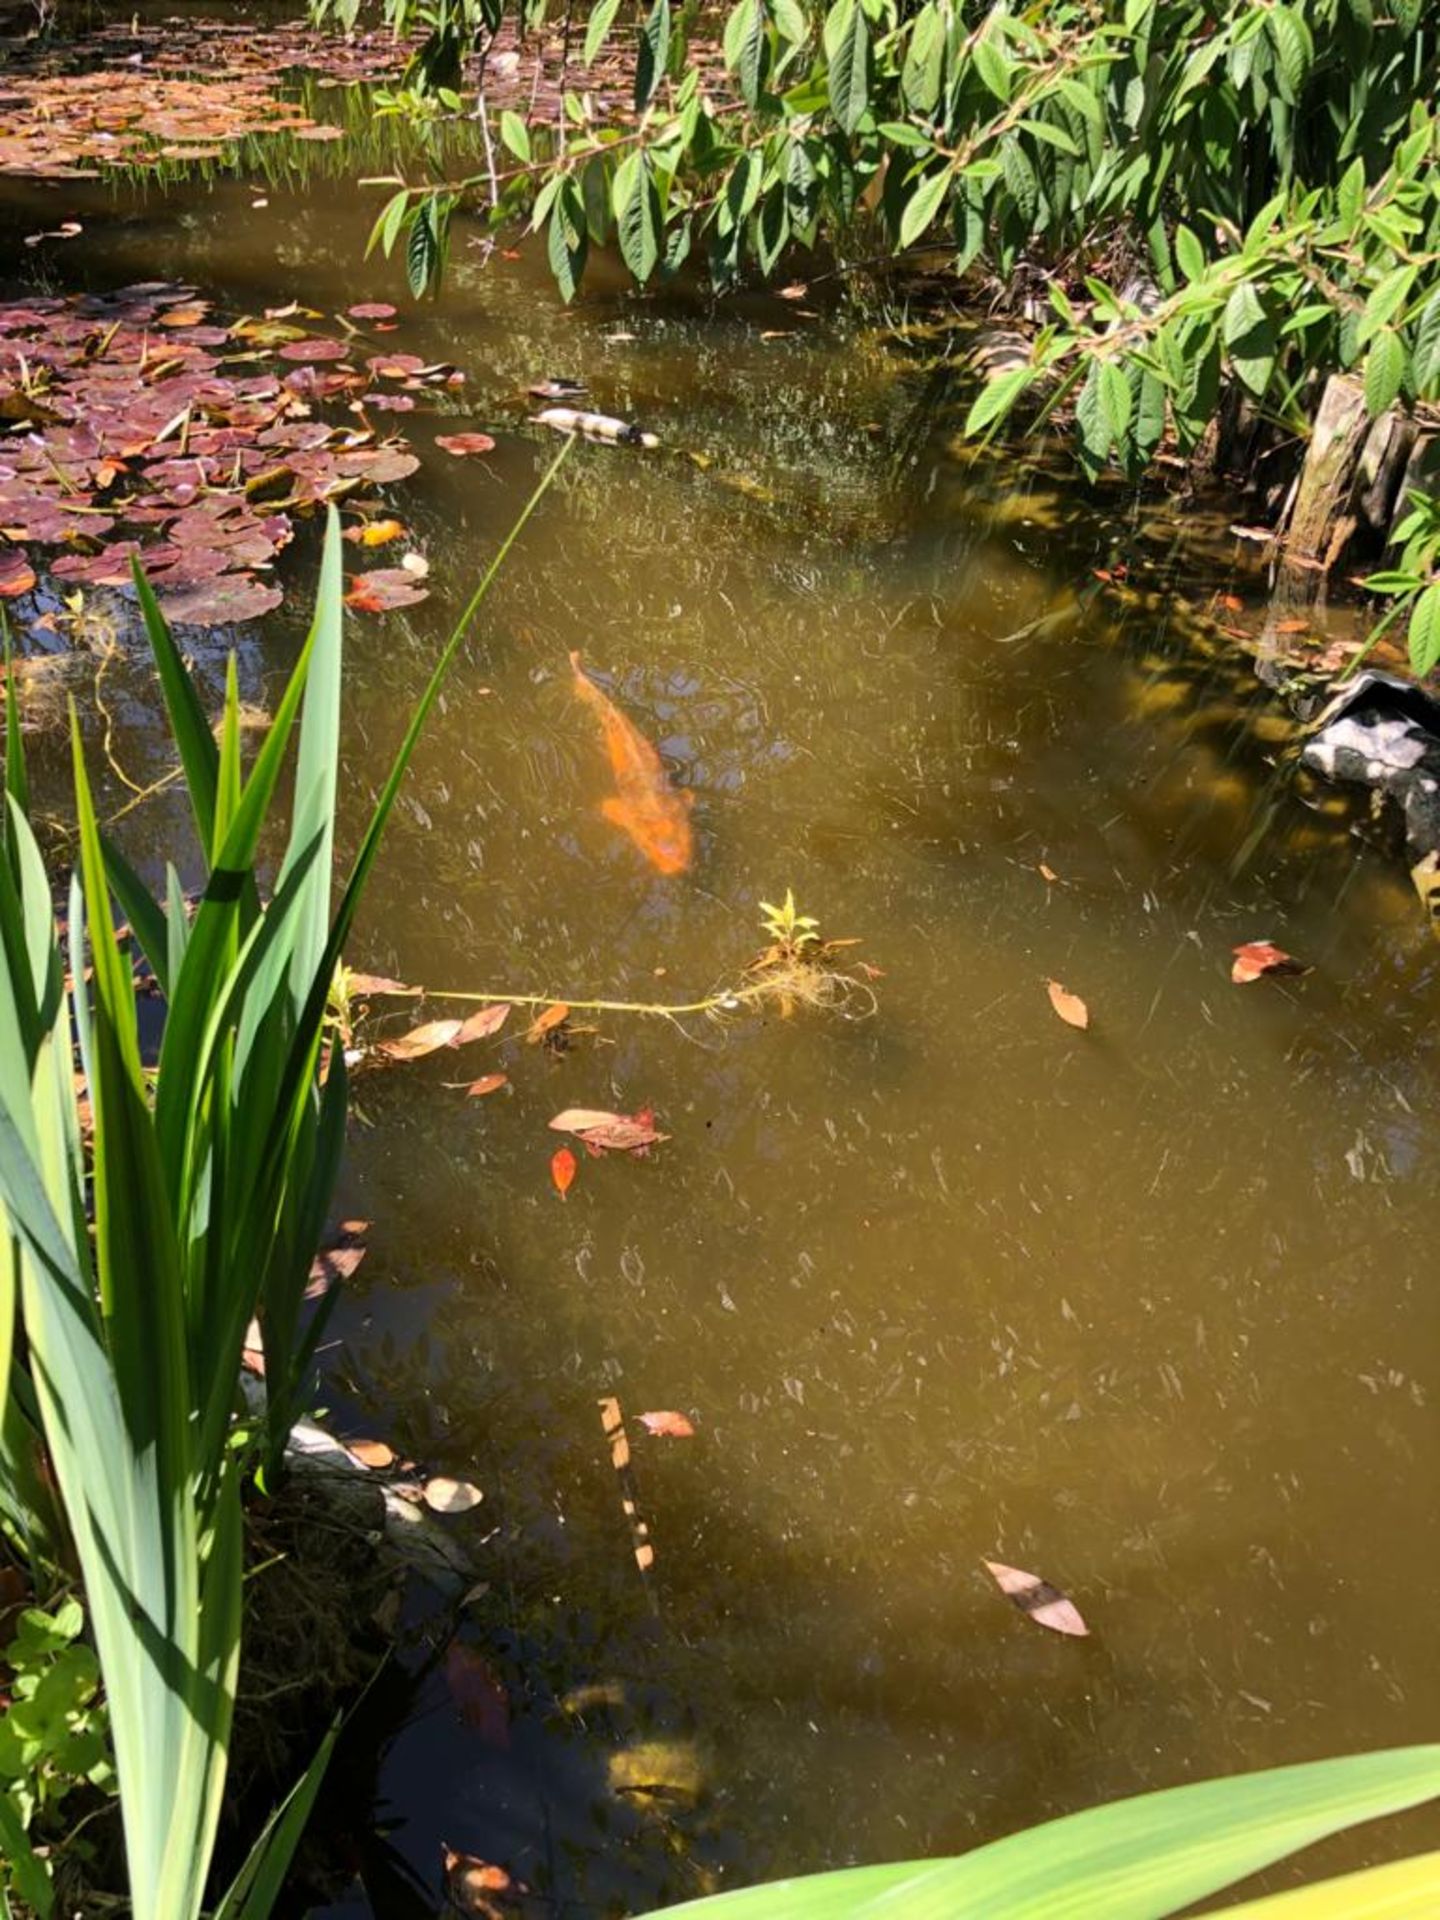 All Koi Carp of Varying Length and Colours to ornamental pond, Approx. 6 Fish, 12 Inch to 24 Inch in - Image 31 of 36